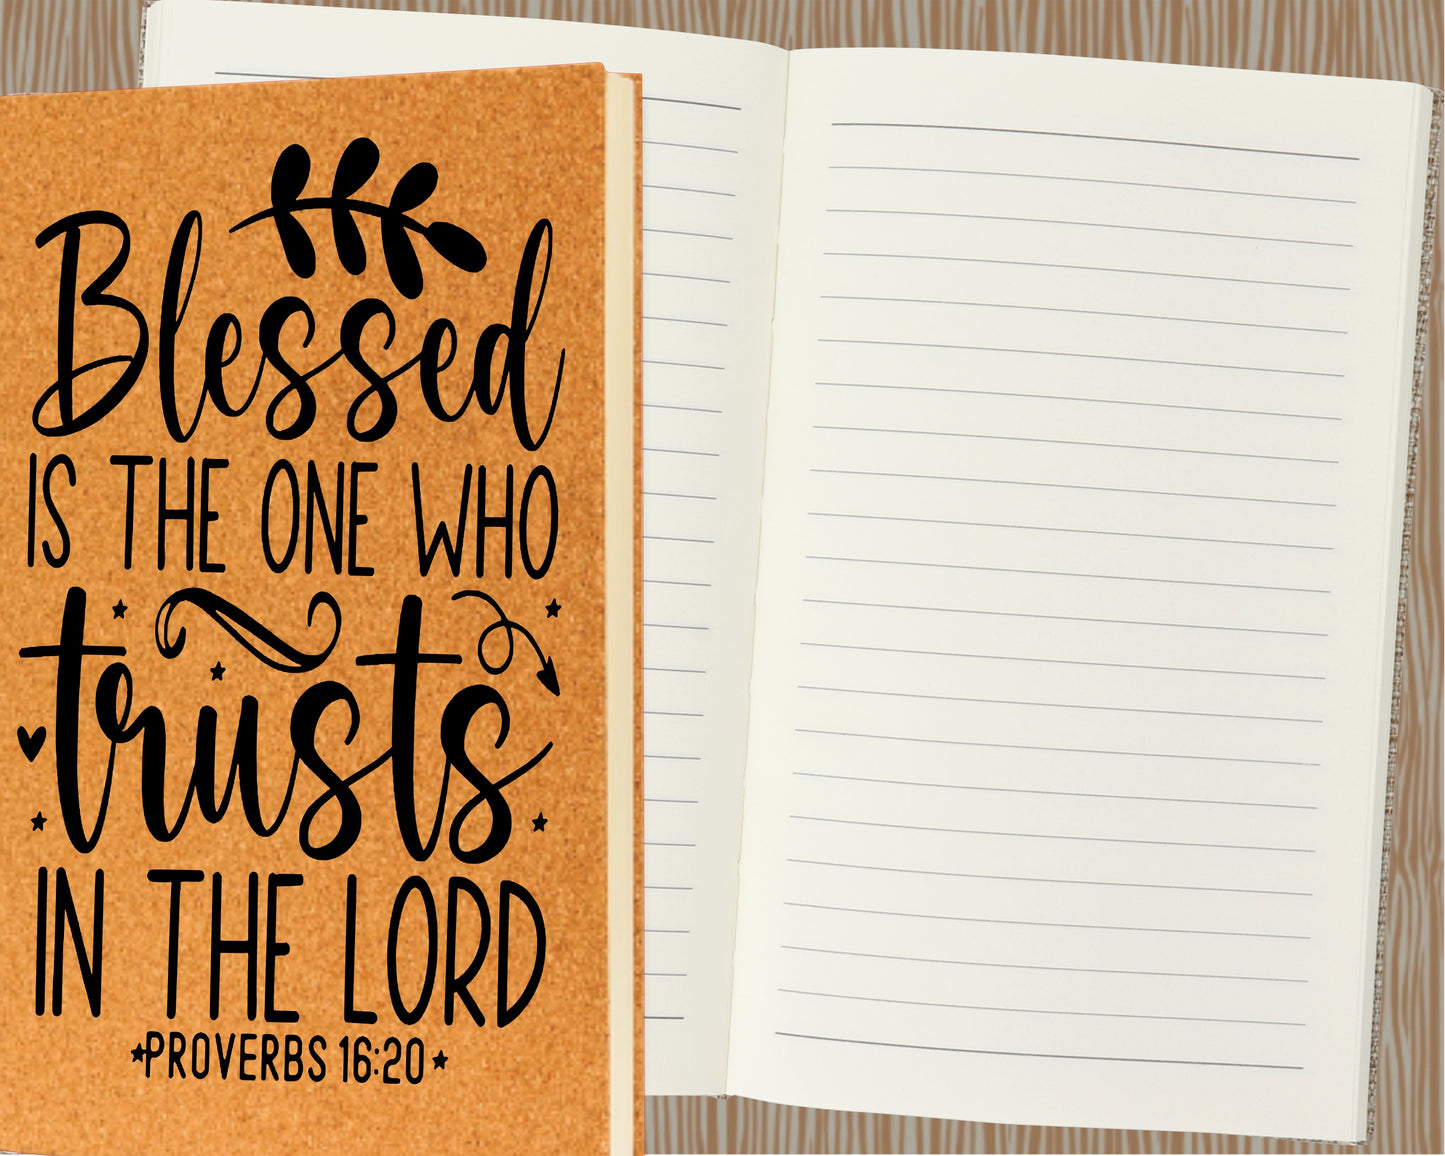 Blessed Is The One Who Trusts In The Lord Journal, Handmade Journal, Engraved Journal, Notebook, Prayer Journal